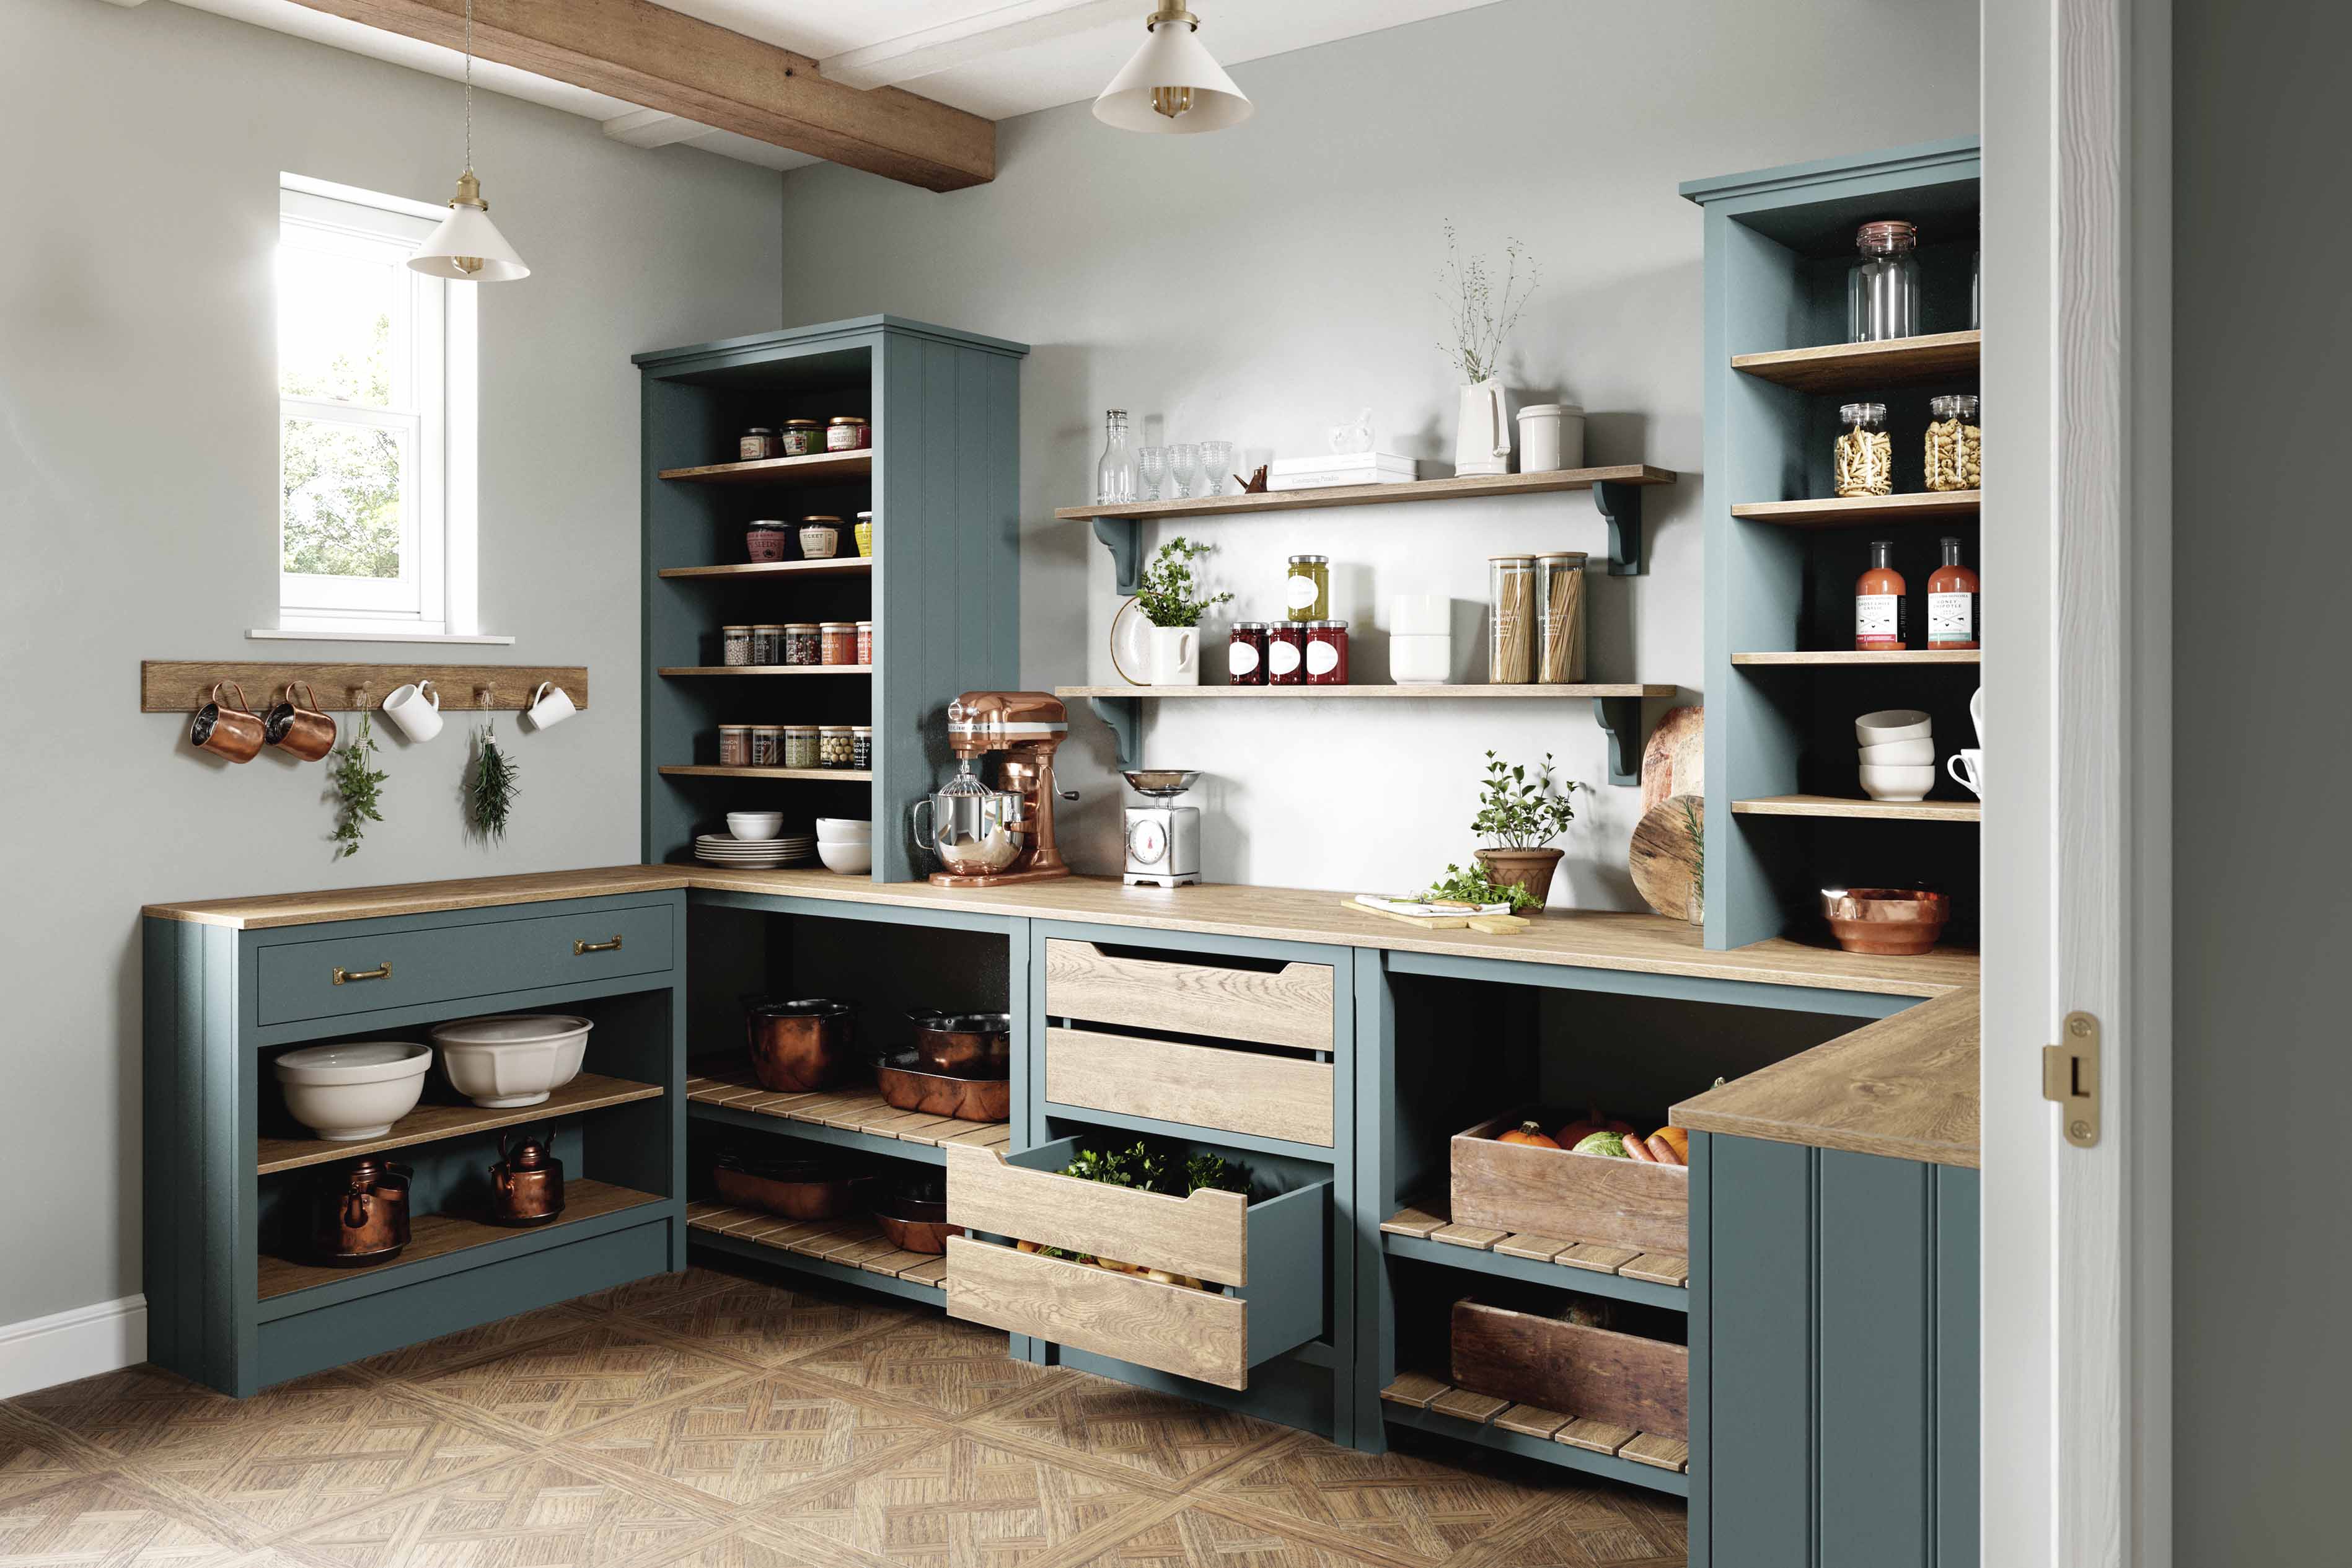 002. Bespoke pantry larder shaker style Farrow and Ball Mylands copper brass vegetable crates Perrin and Rowe Jim Lawrence Alton Hampshire